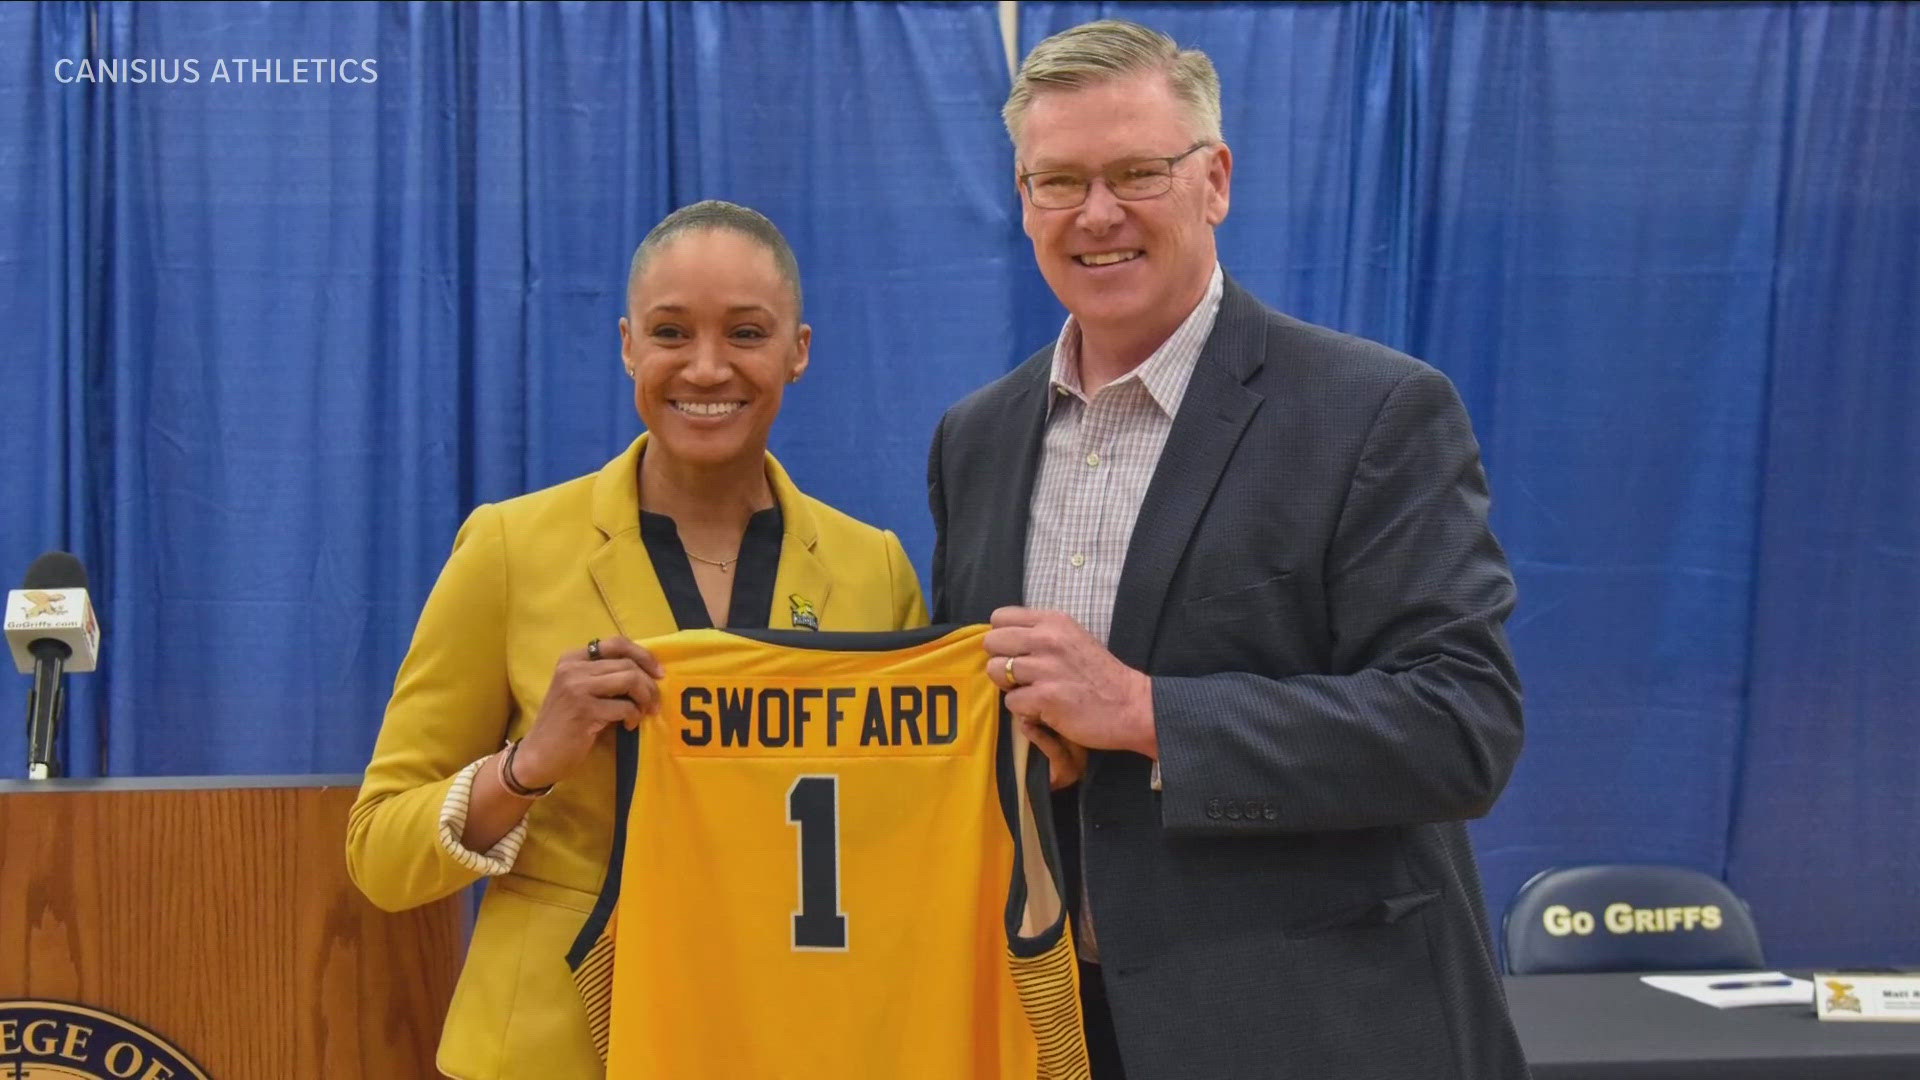 It’s a first-time head-coaching position for Swoffard, who has 19 seasons of experience as a college assistant.